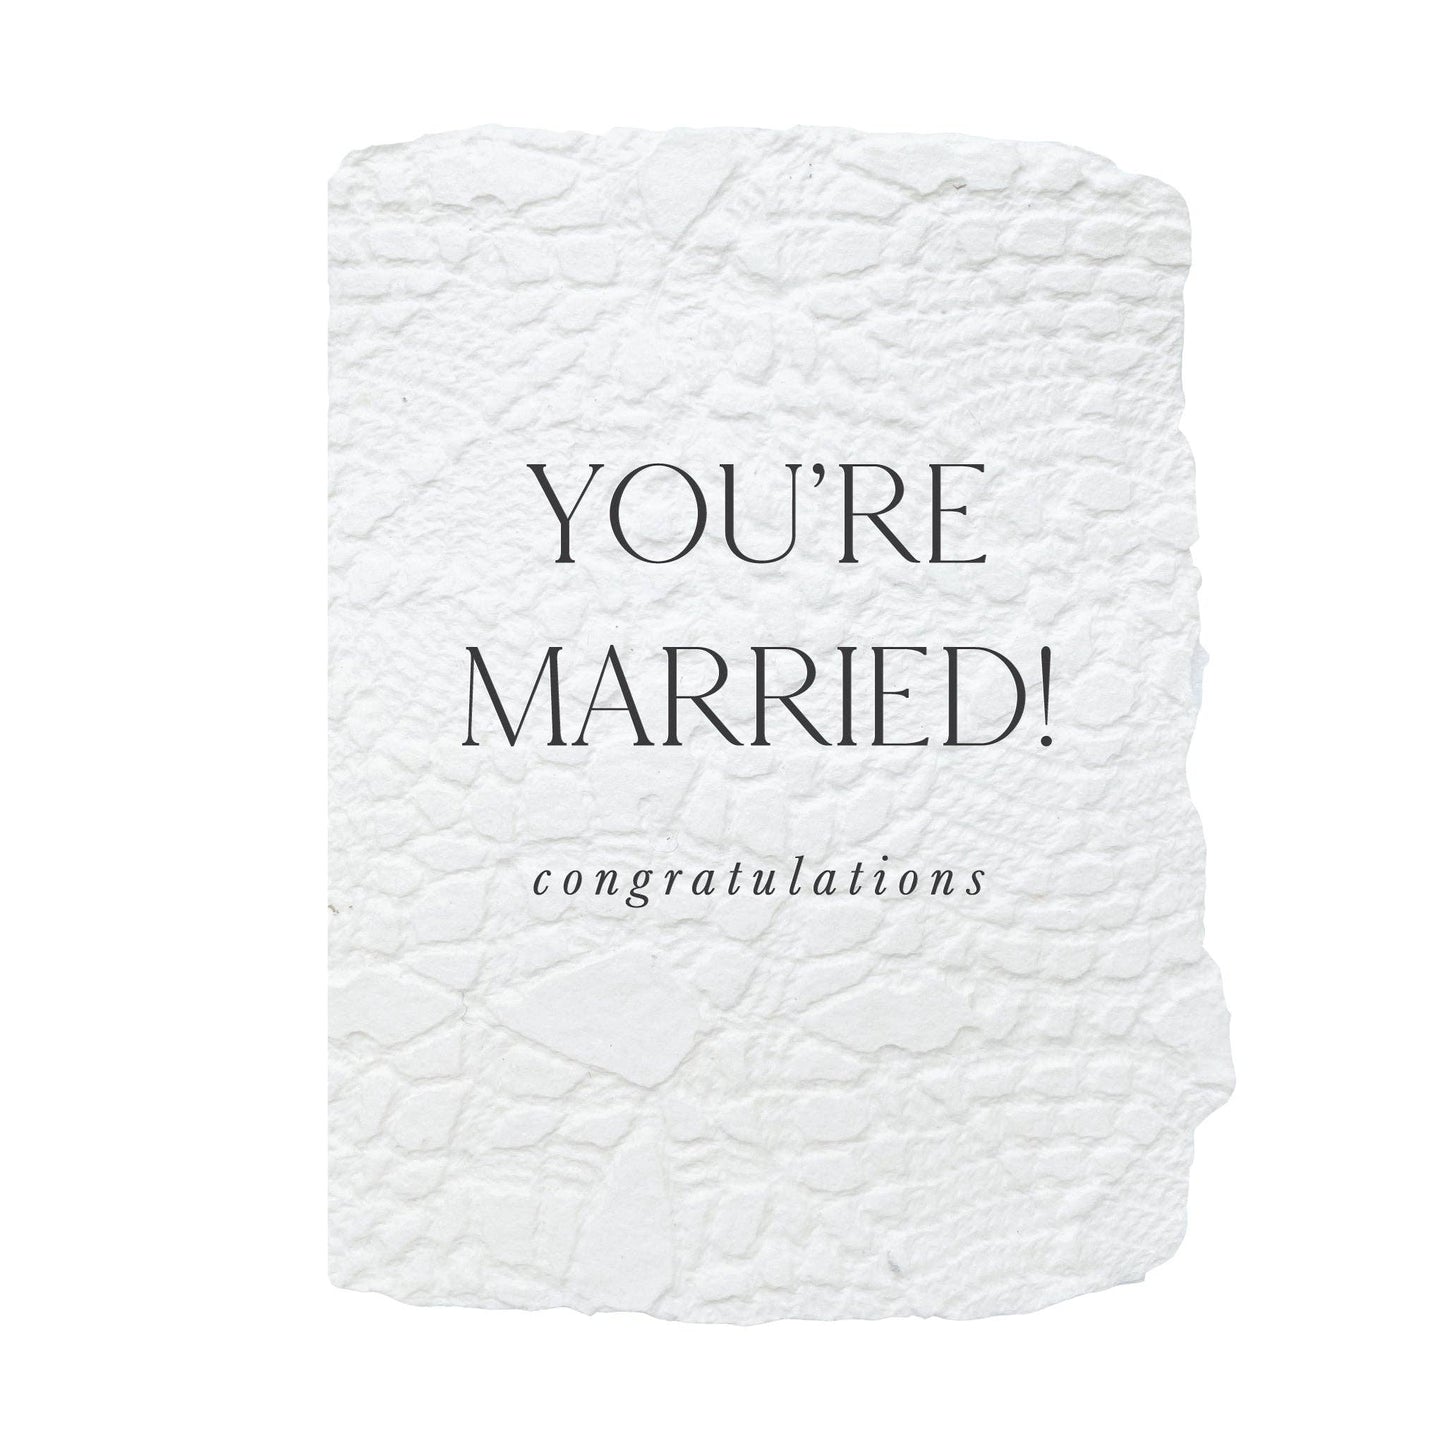 You’re married! congratulations card | Handmade greeting card